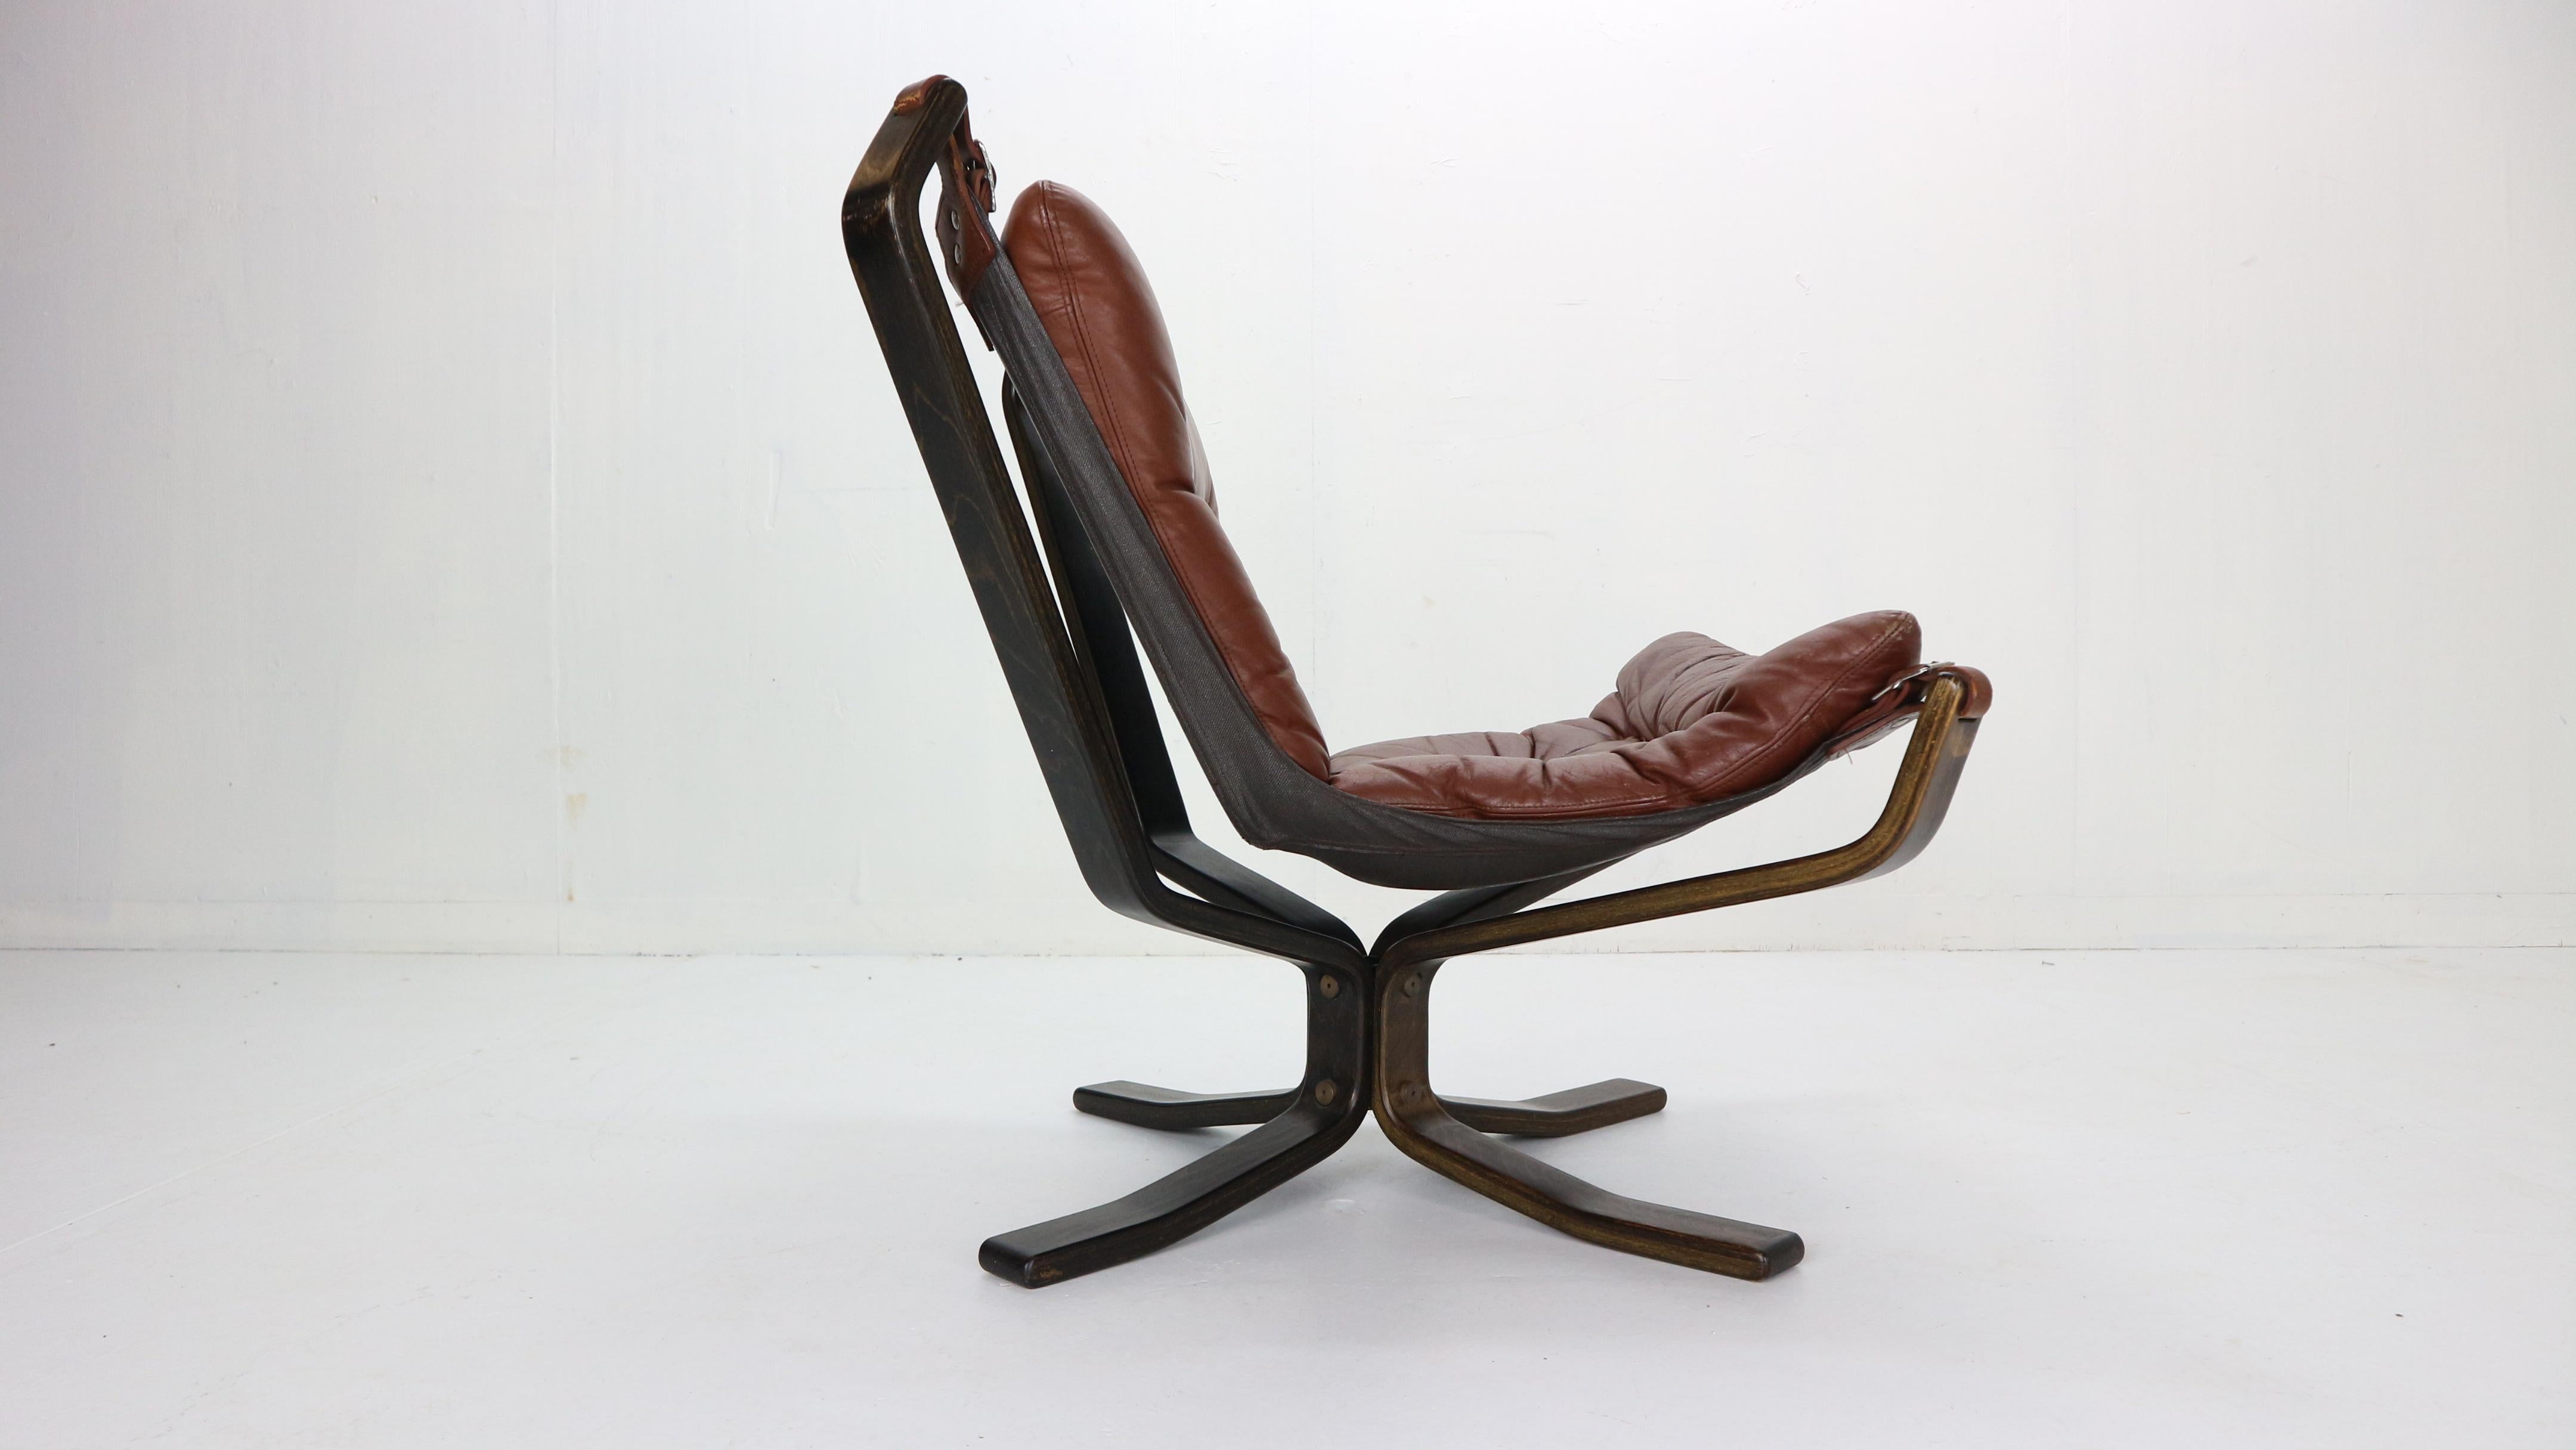 Bentwood Sigurd Ressell Falcon Brown Leather Lounge Chair for Vatne Møbler, 1970, Norway